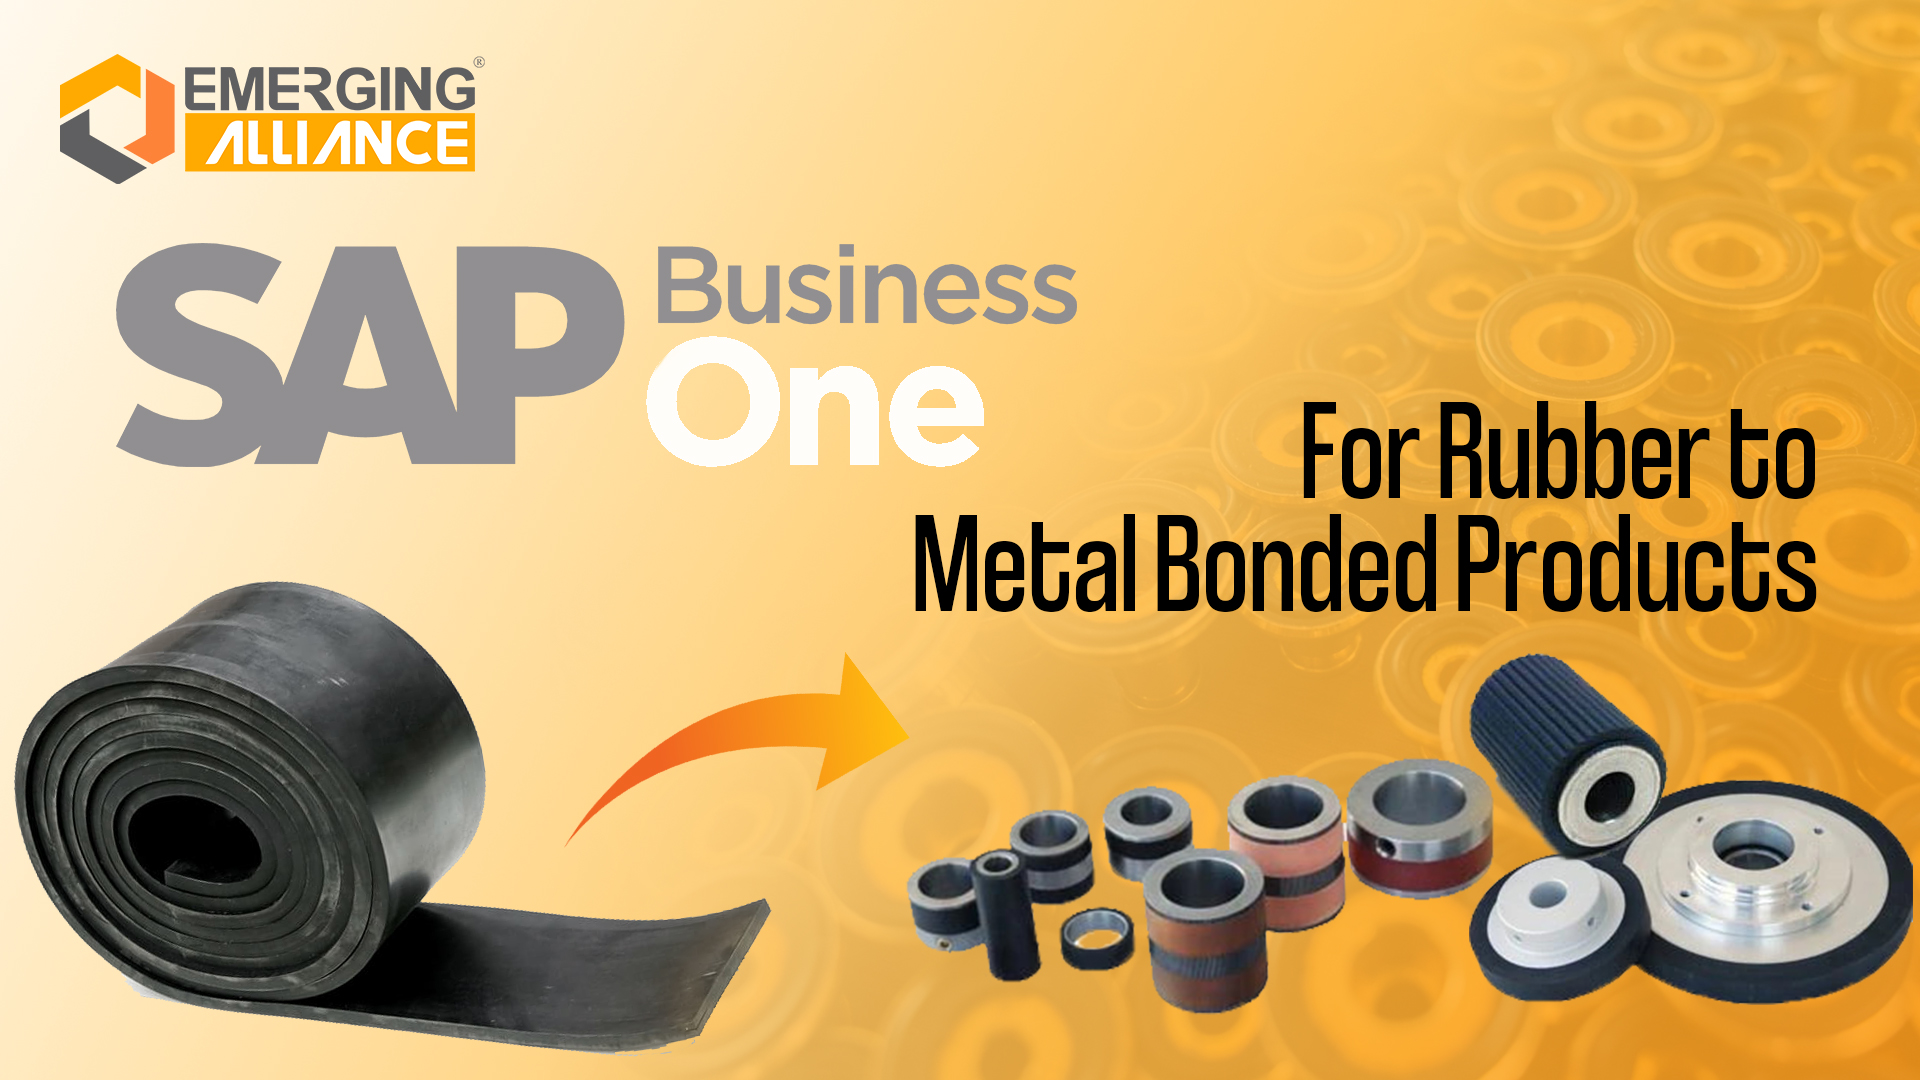 SAP Business One for Hydraulics Manufacturing